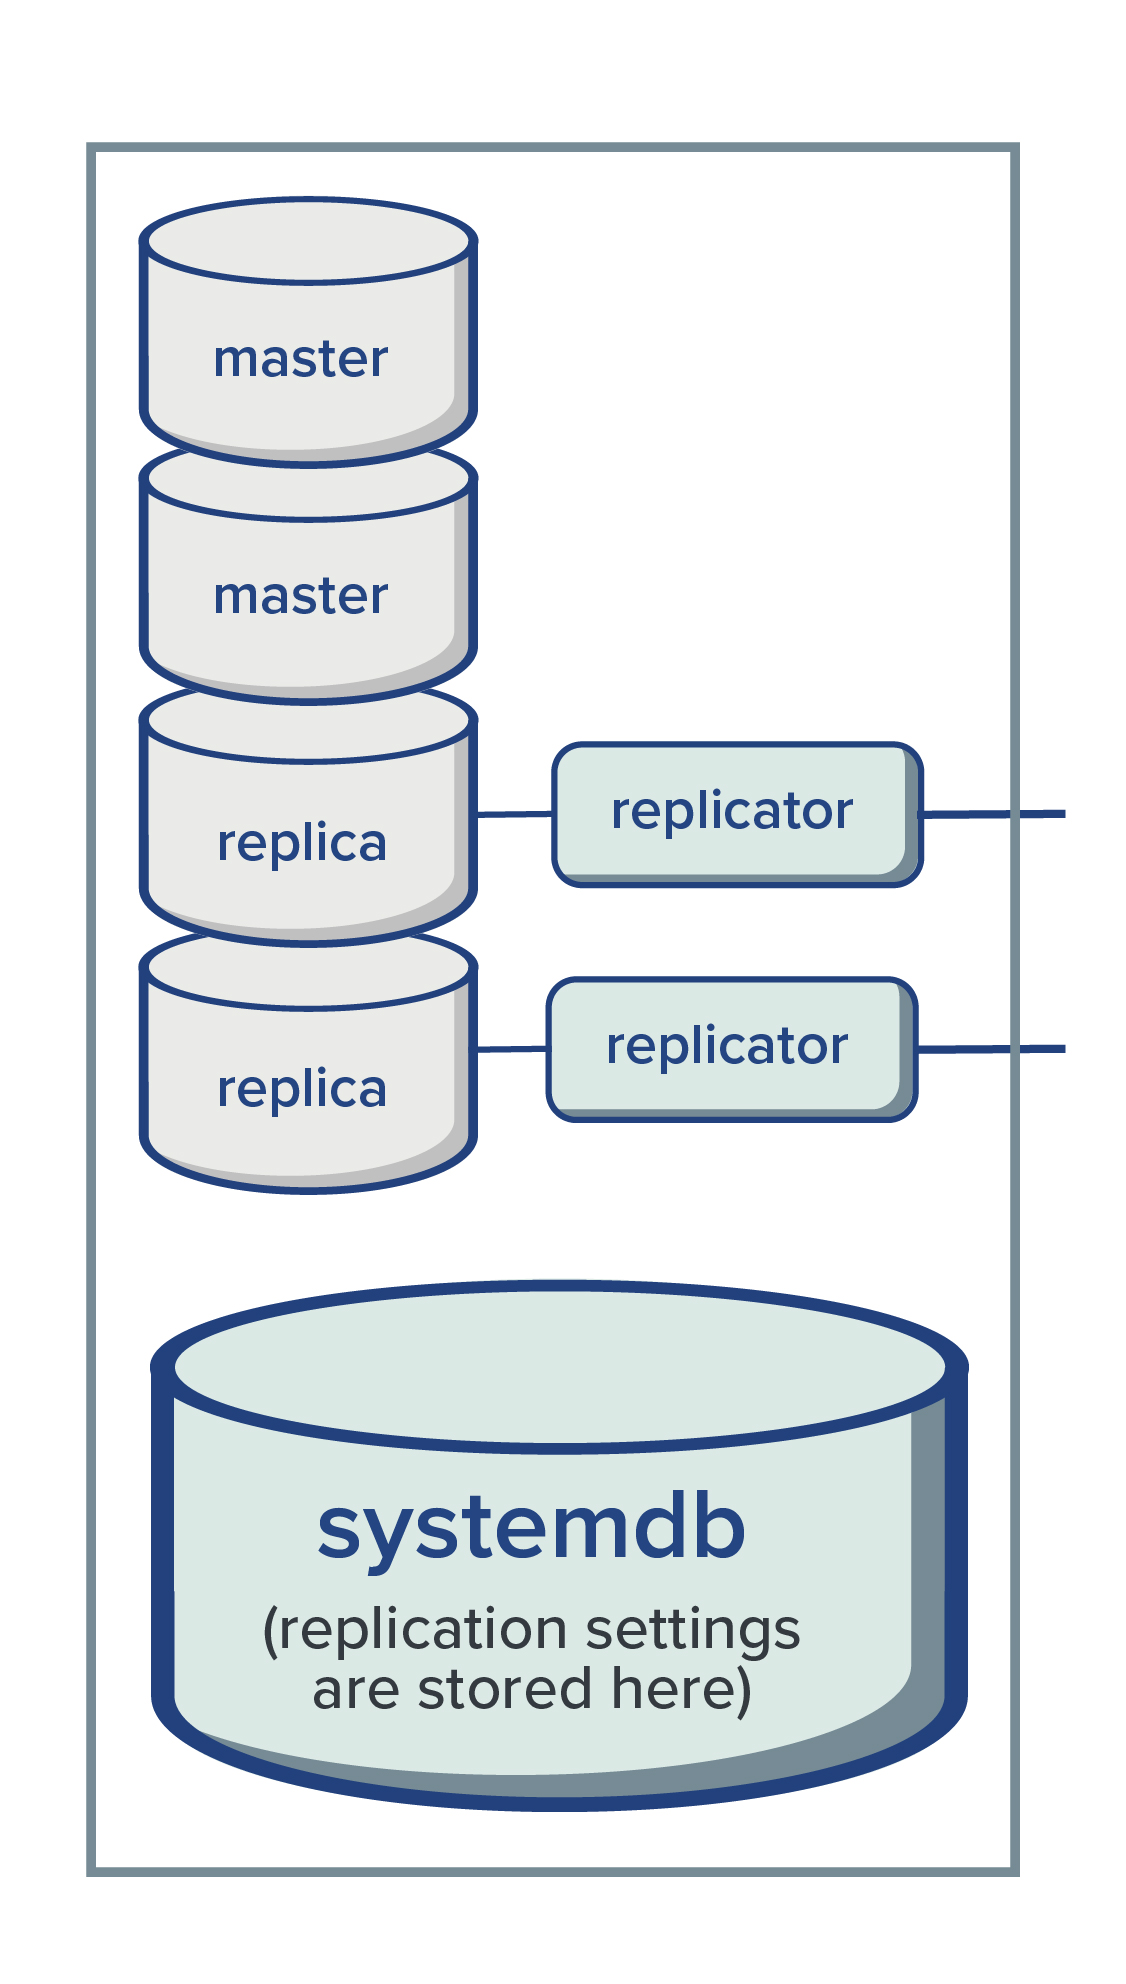 a single immudb server can hold multiple primary and replica databases